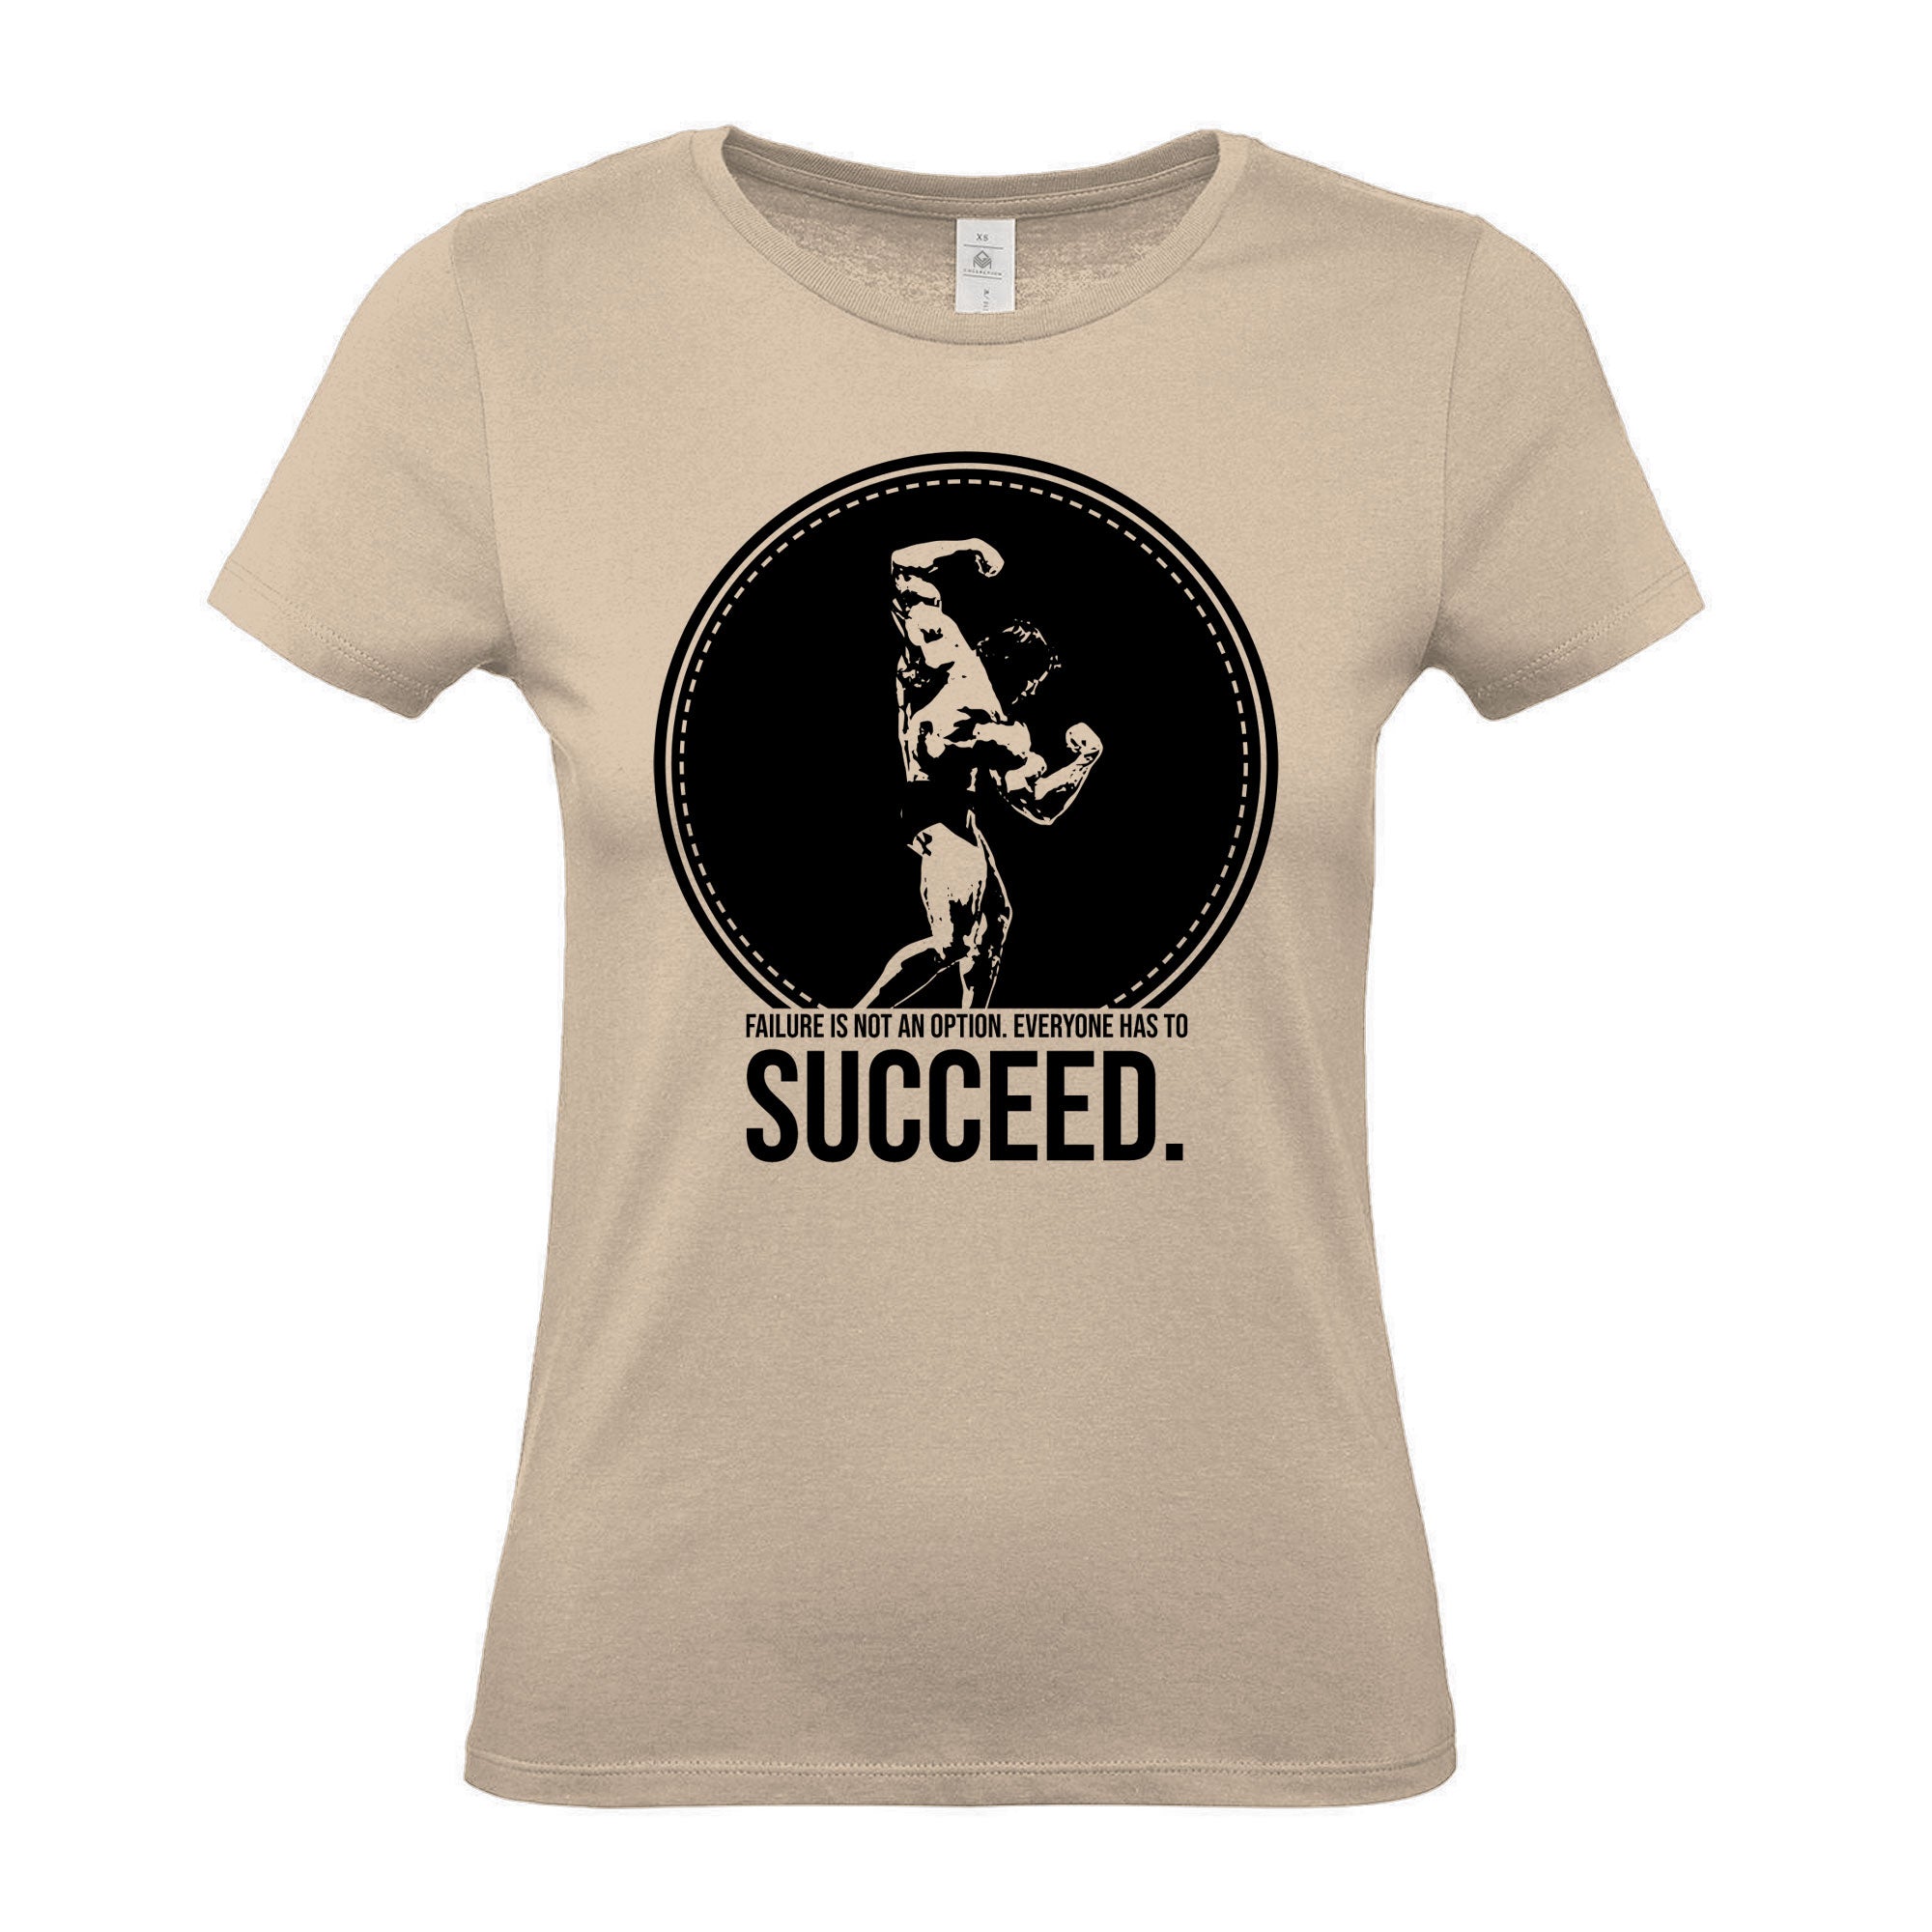 Arnold Succeed - Women's Gym T-Shirt